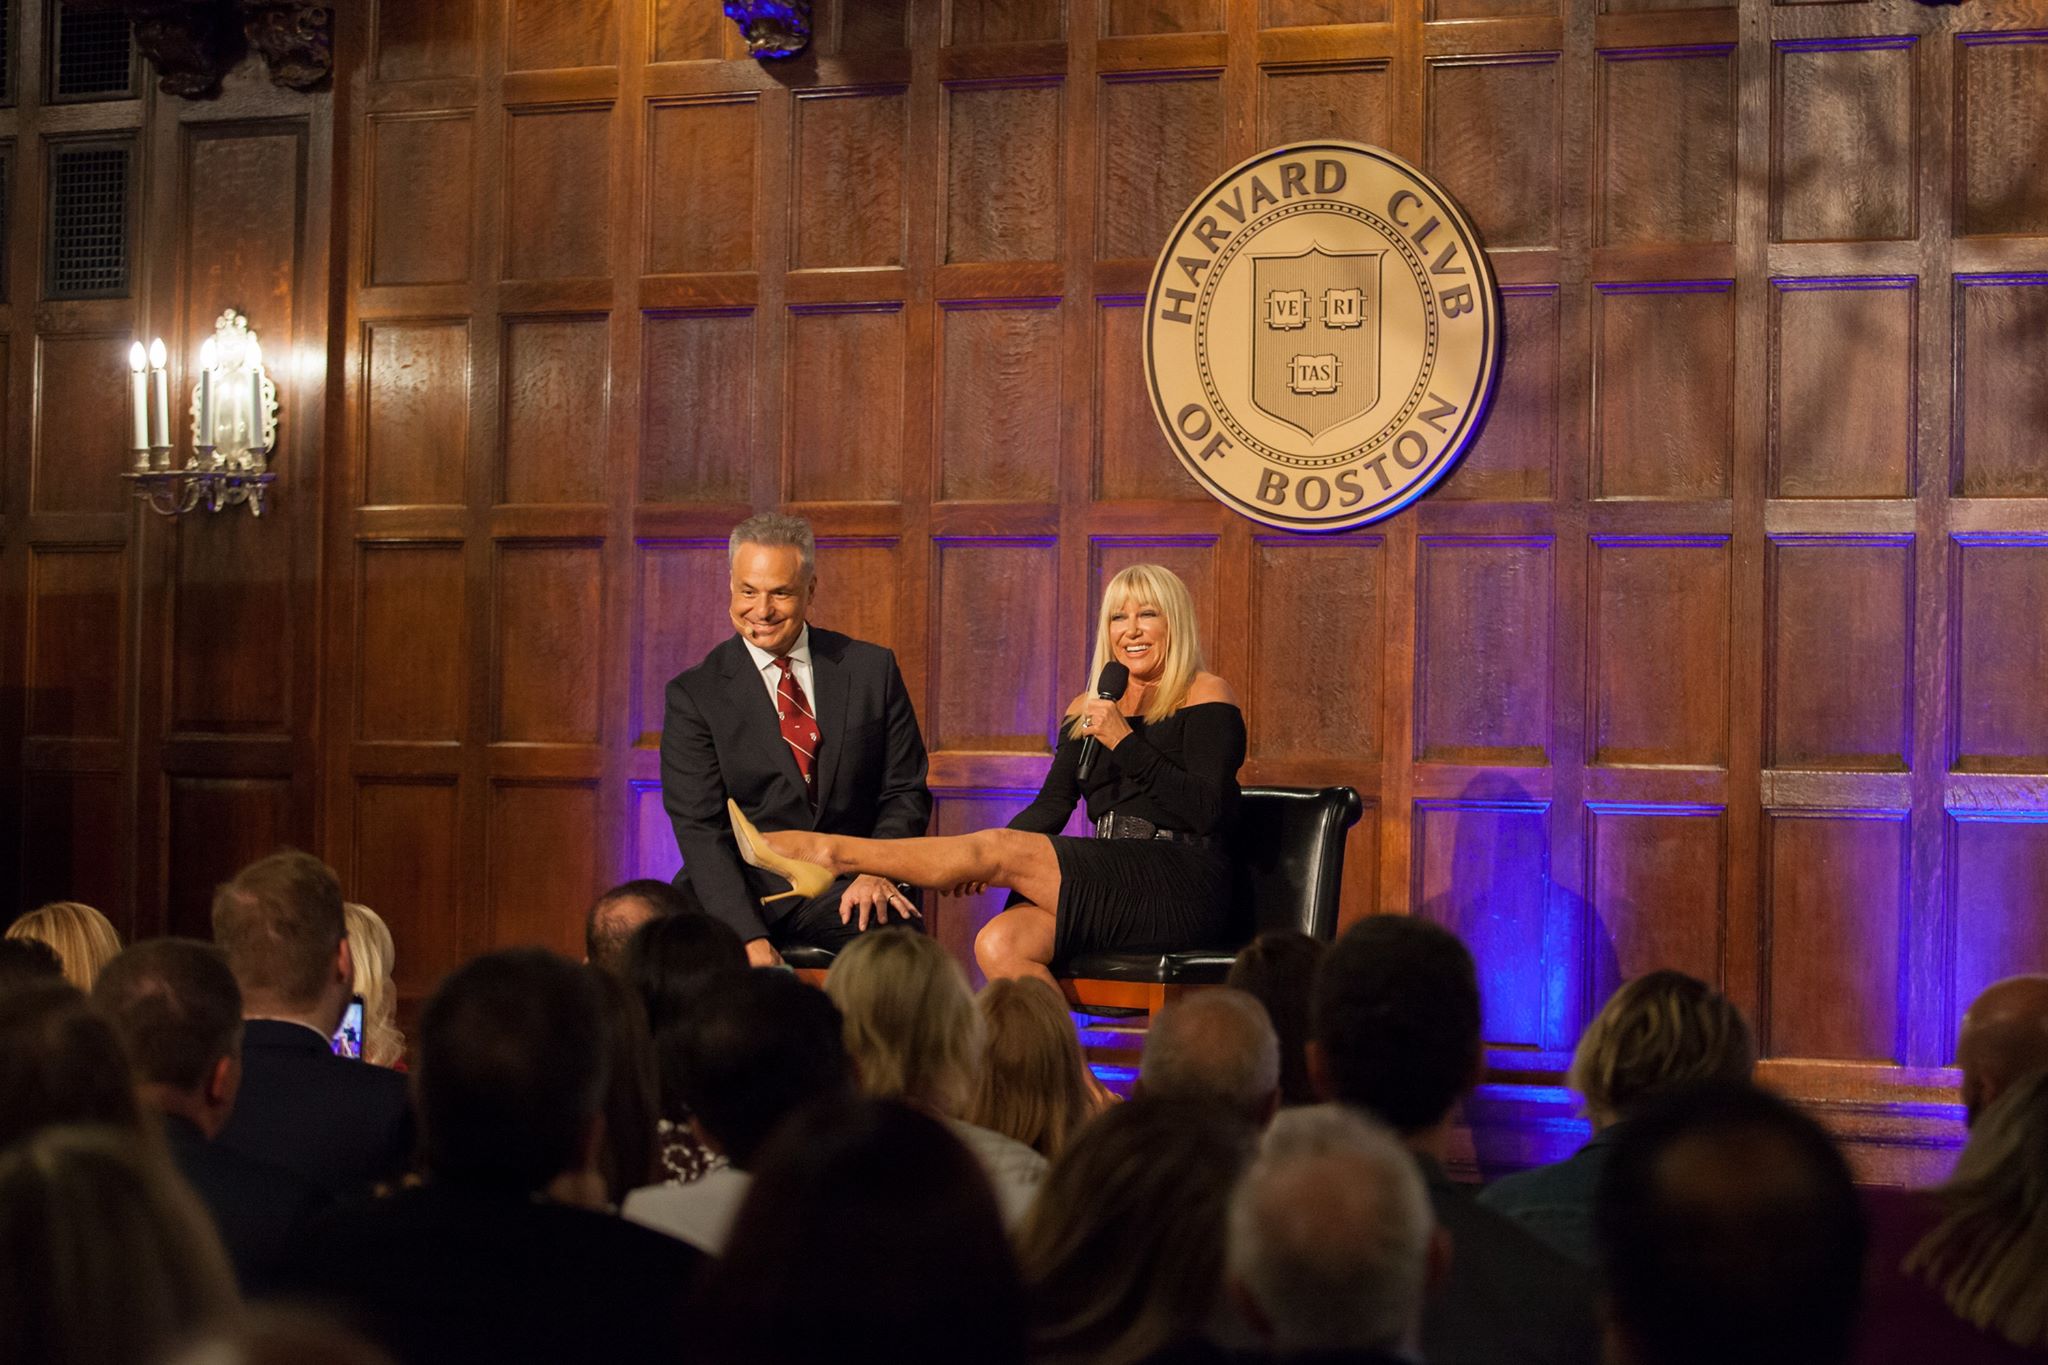 Clint Arthur & Suzanne Somers at the Harvard Club of Boston